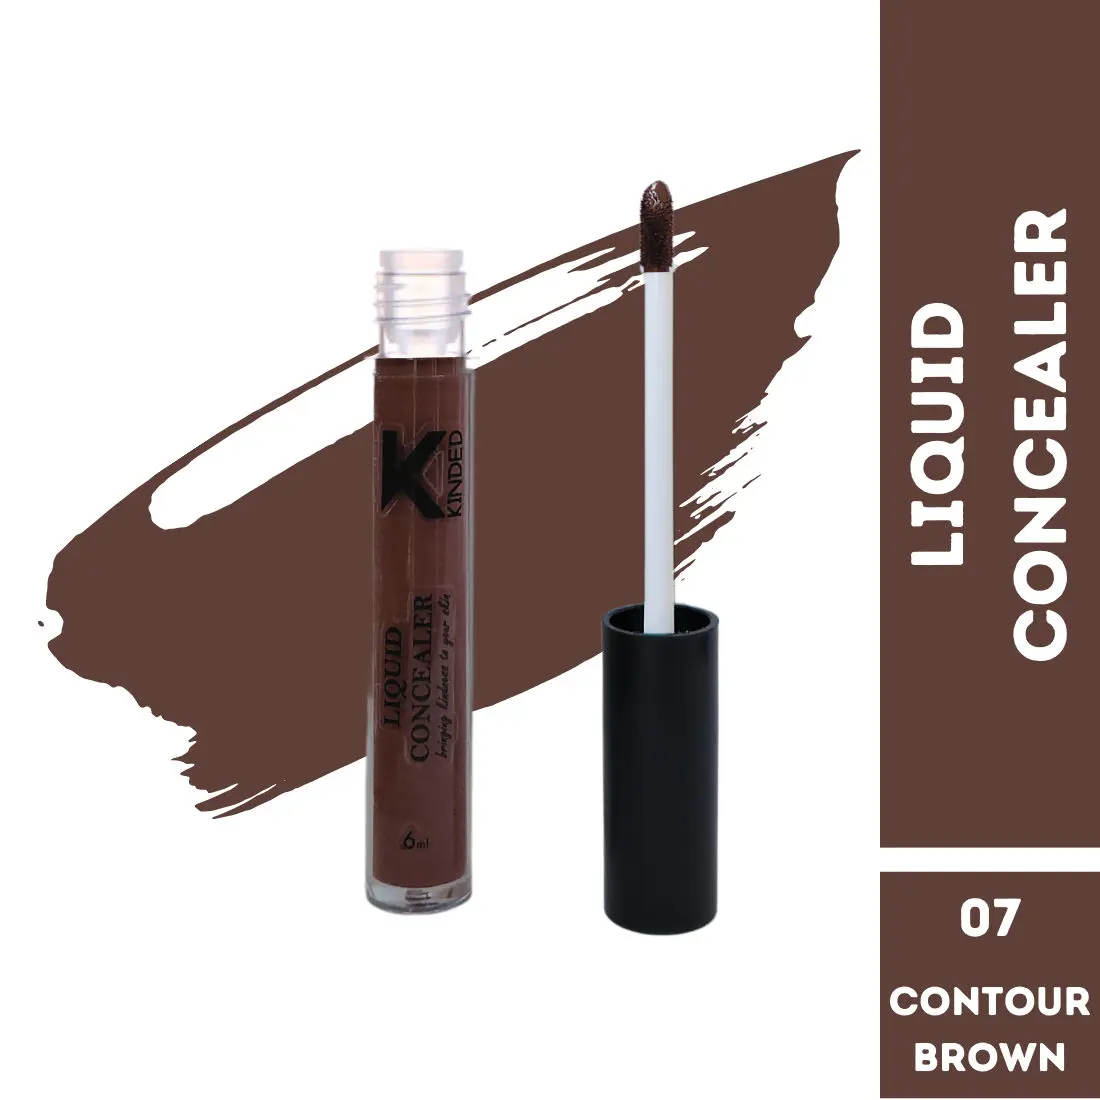 KINDED Liquid Concealer for Face Makeup Full Coverage Colour Corrector Contour Waterproof HD Pro Master Series for Dry & Oily Skin Acne Dark Circles Dark Spots (Creamy Matte, Contour Brown, 6 ml)